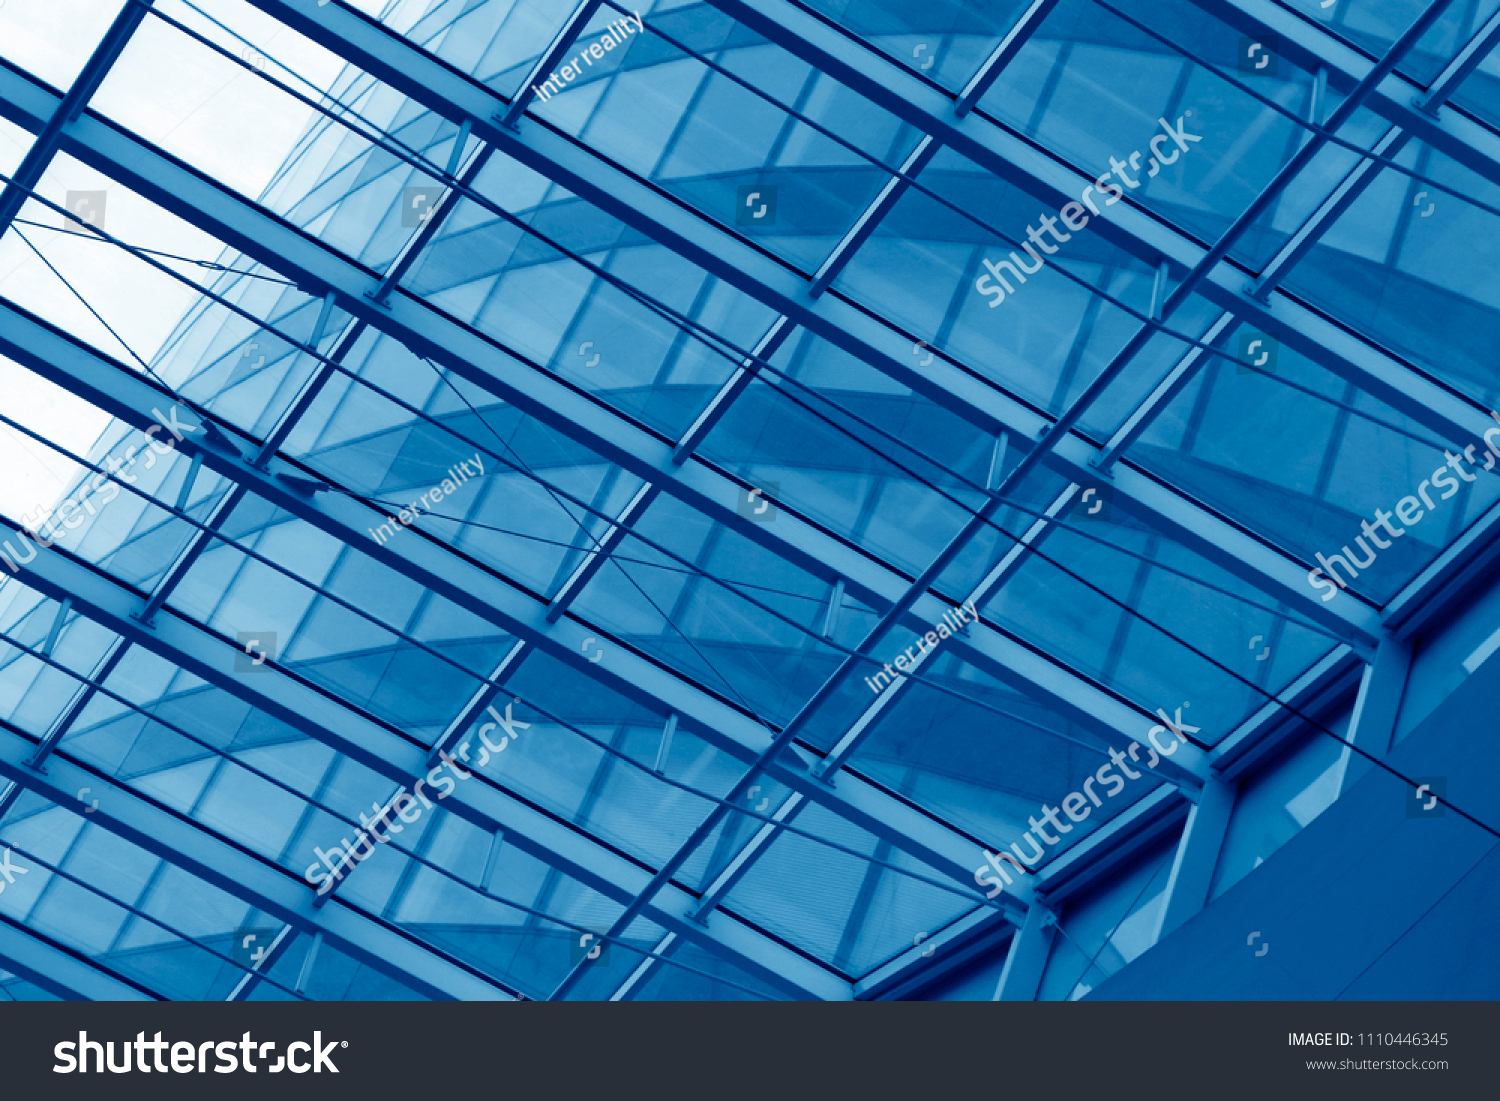 Business city with reflection of sky. Close-up of an office building visible through transparent framed walls. Modern architecture background with structural glazing / windows. #1110446345